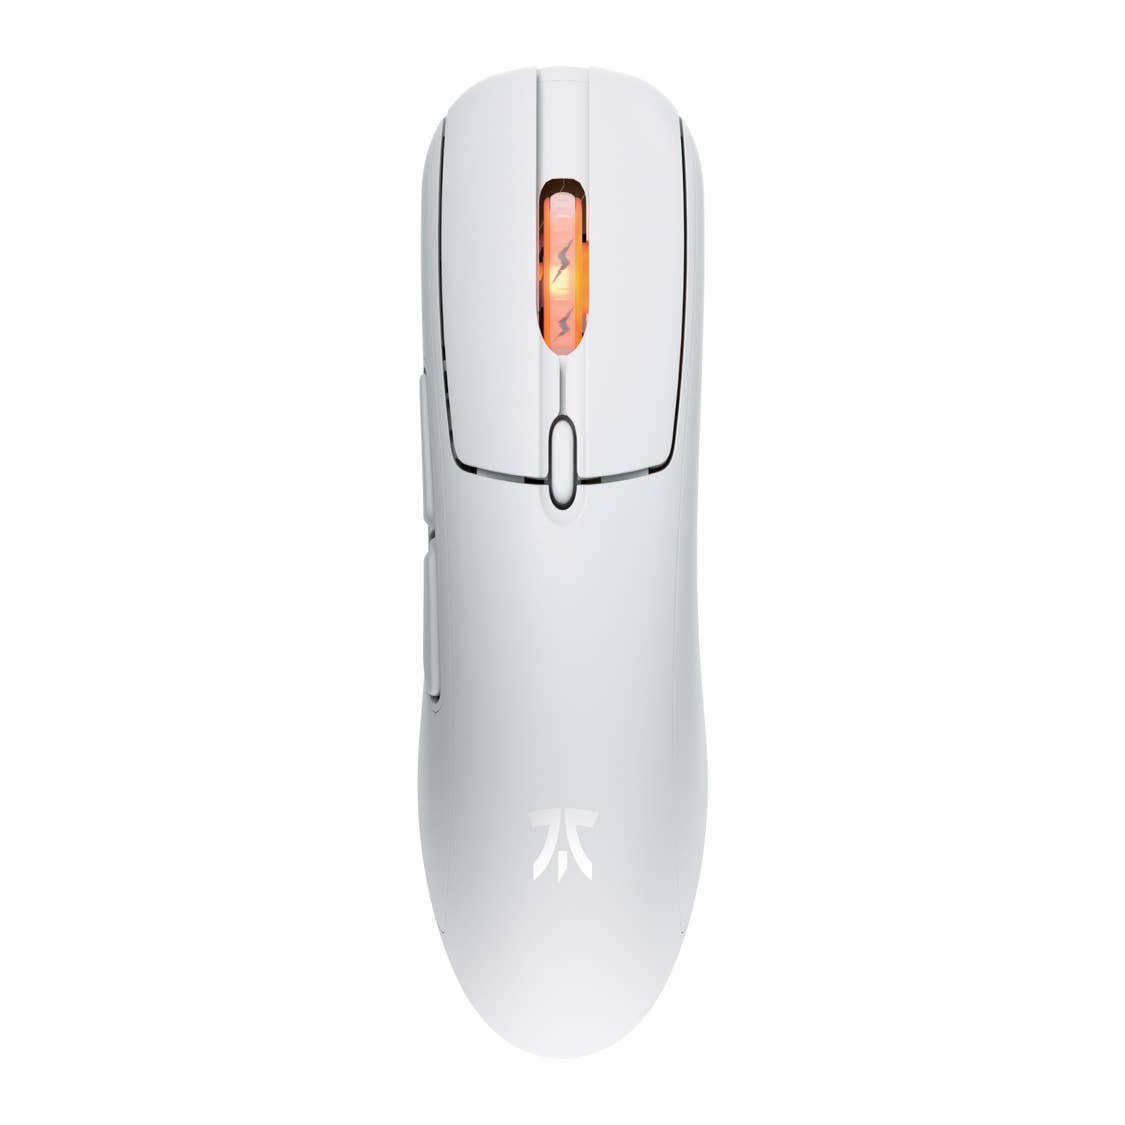 Modular designs, MMO specials and ultra-lights for FPS: 2023 mouse